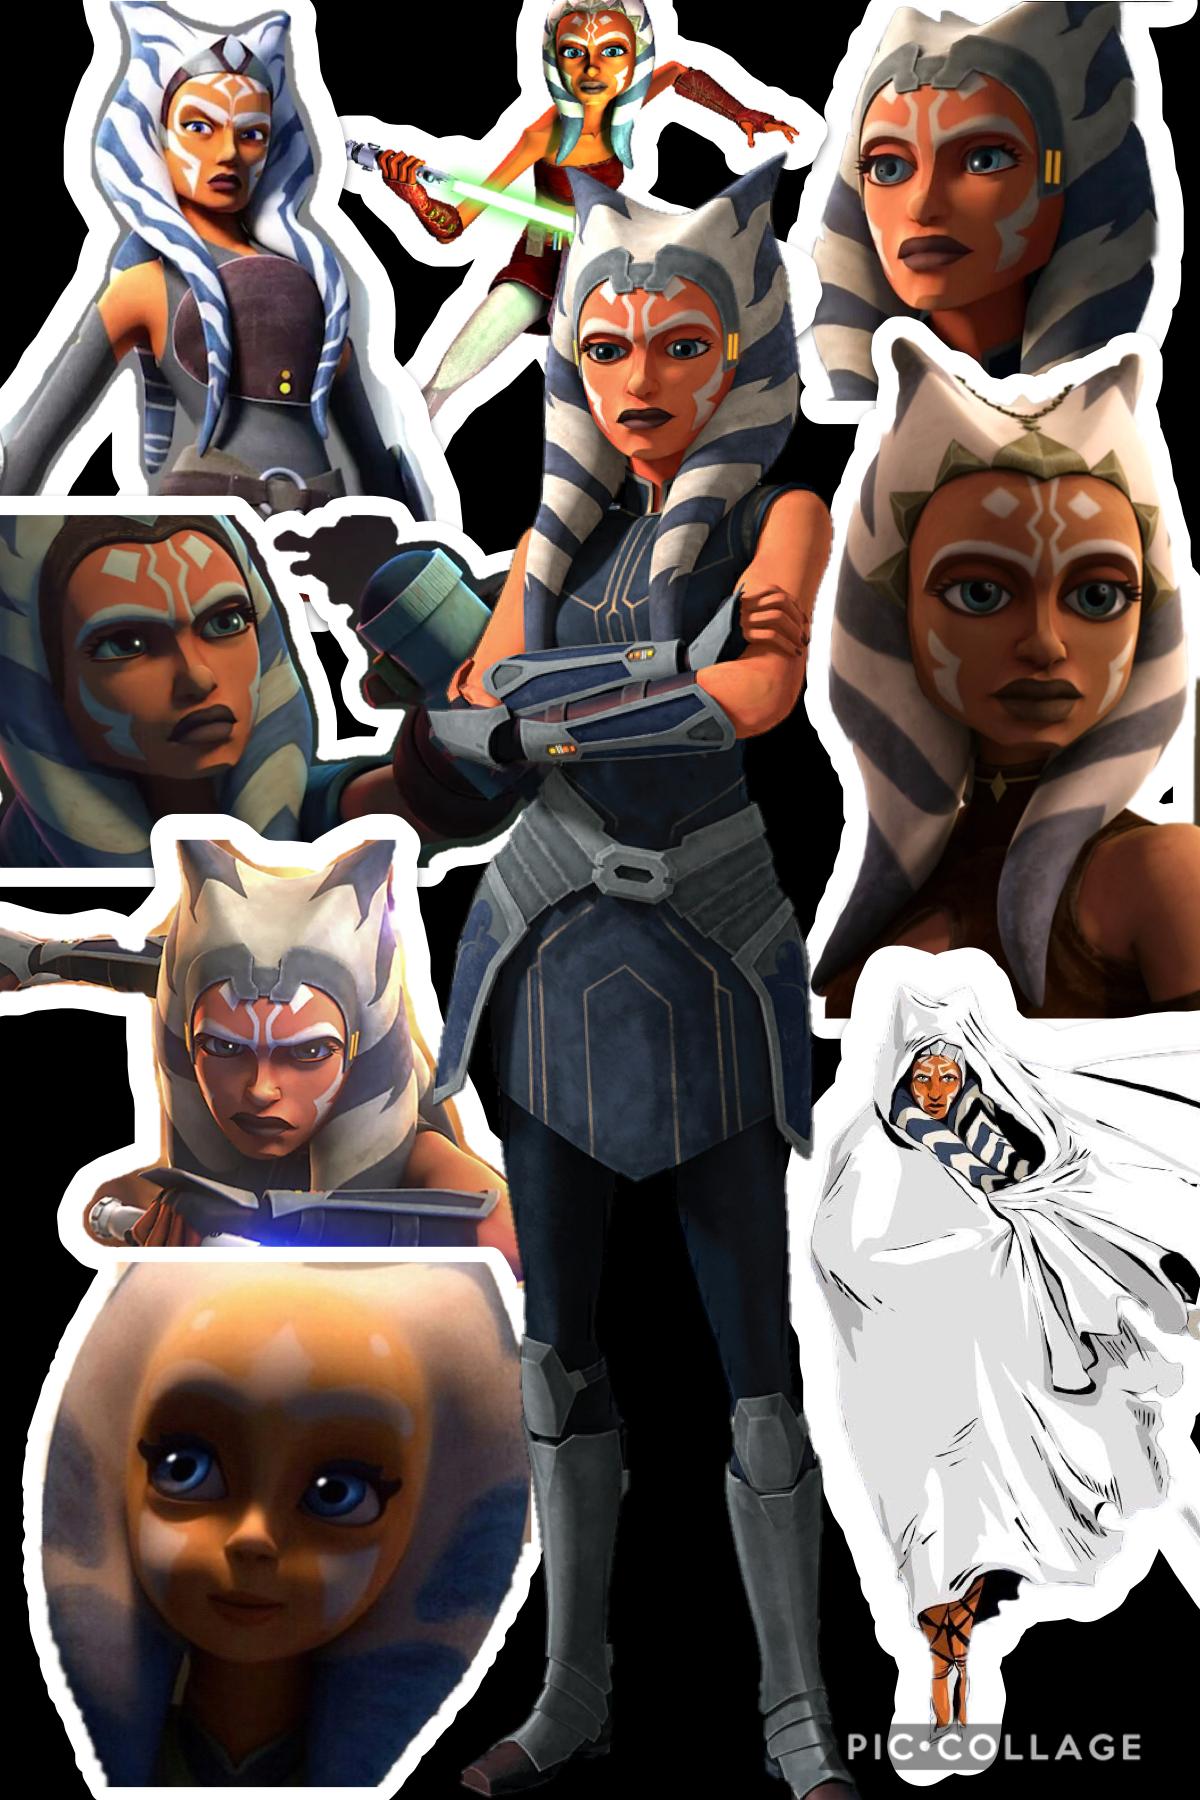 Don’t mind me with my terrible editing skills and slight obsession with Ahsoka Tano 